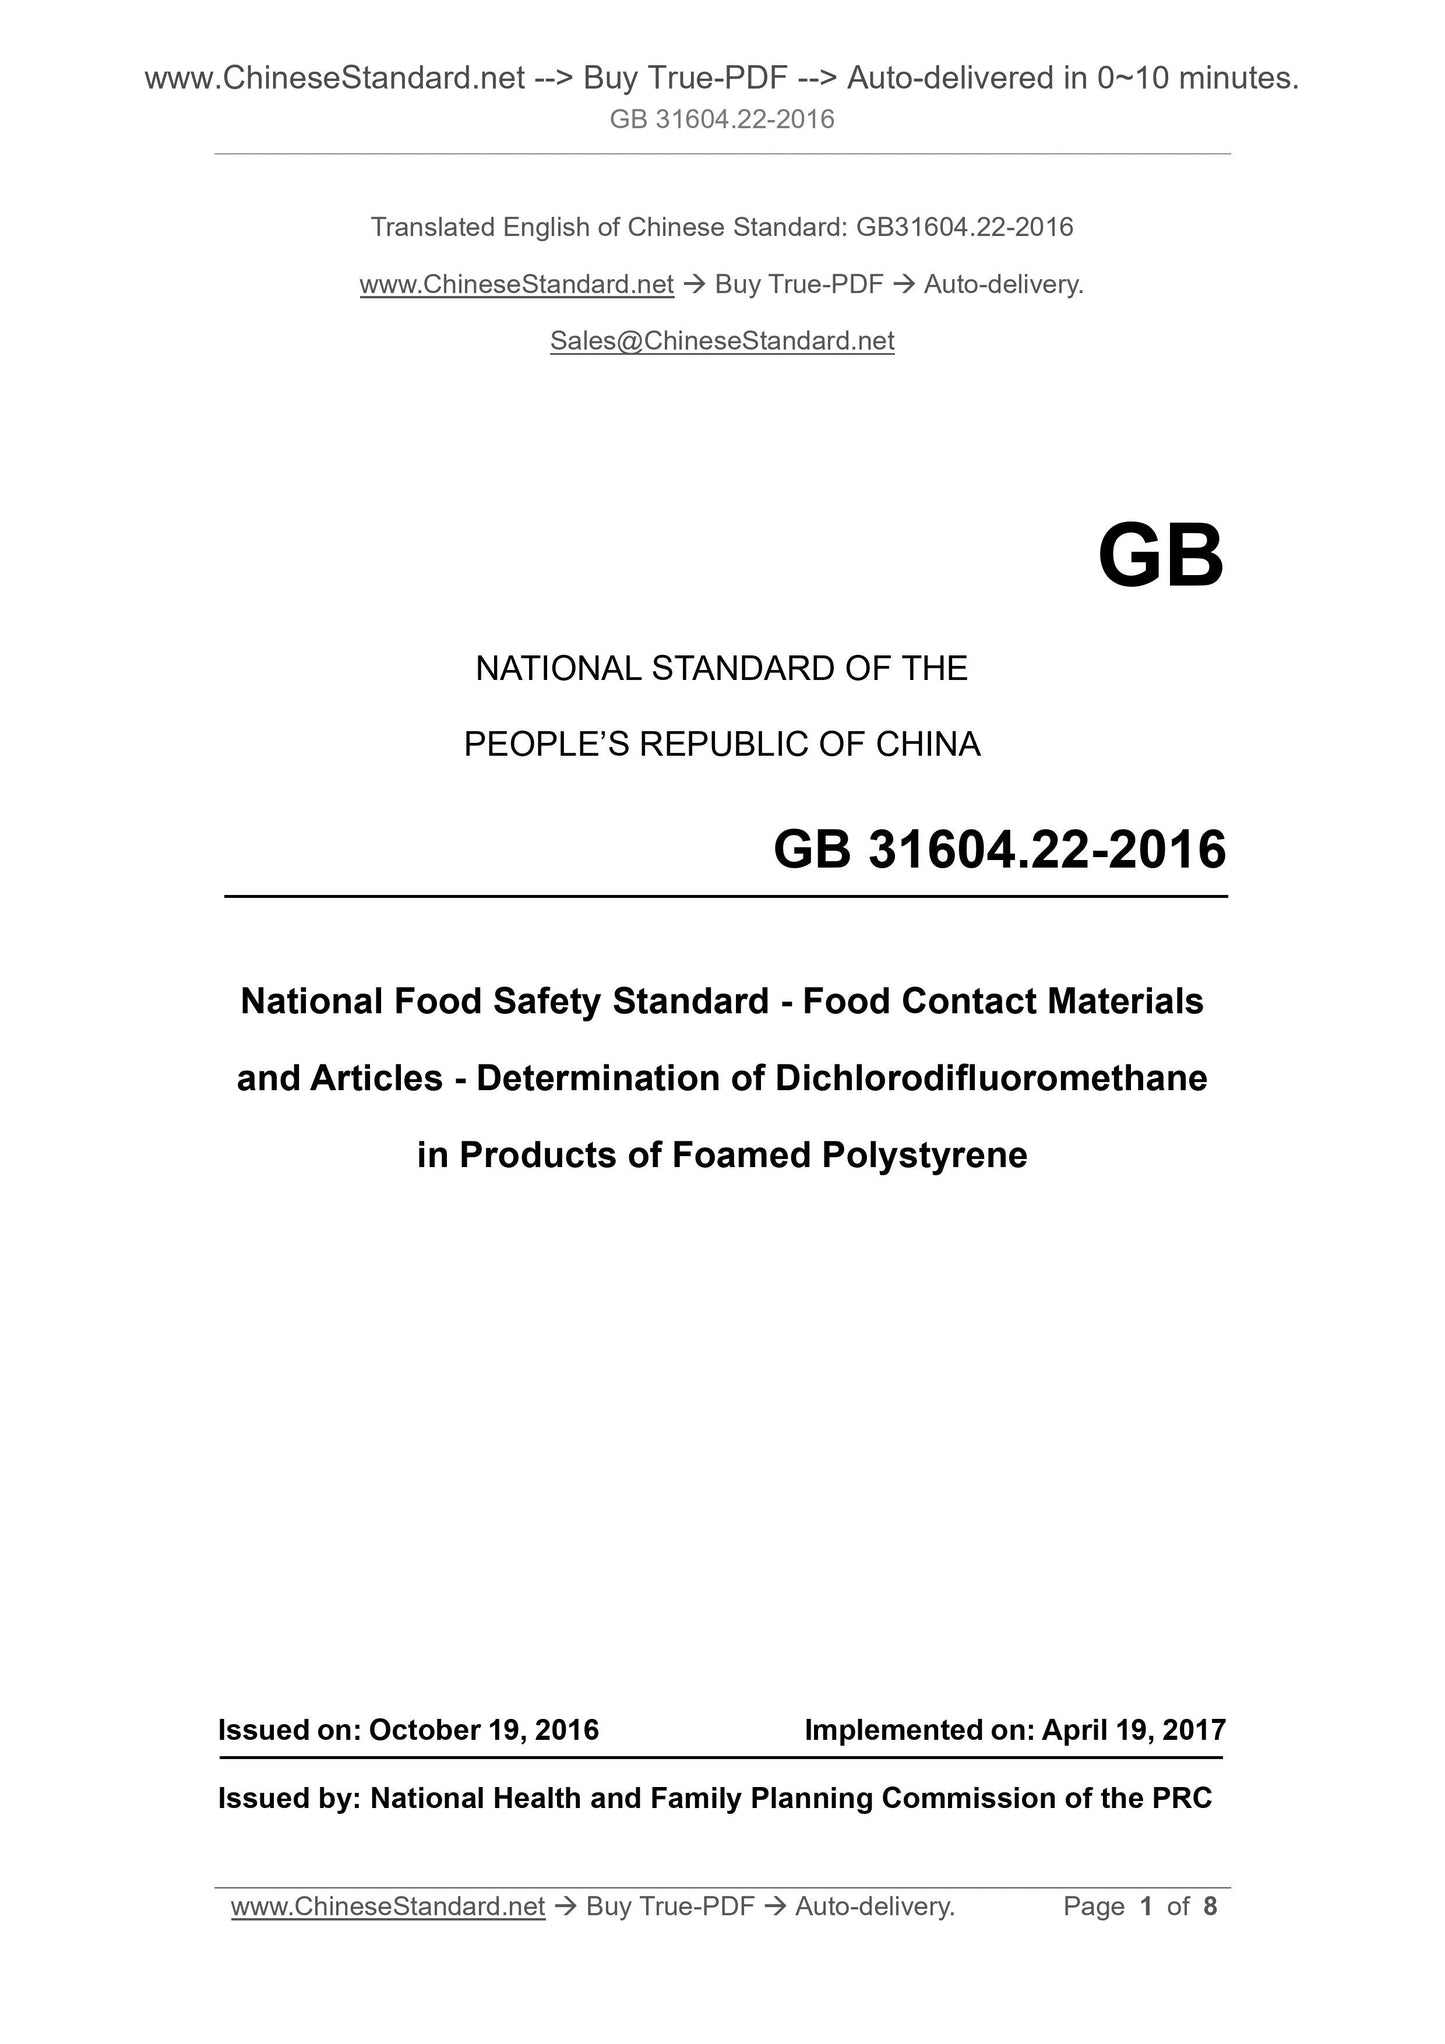 GB 31604.22-2016 Page 1